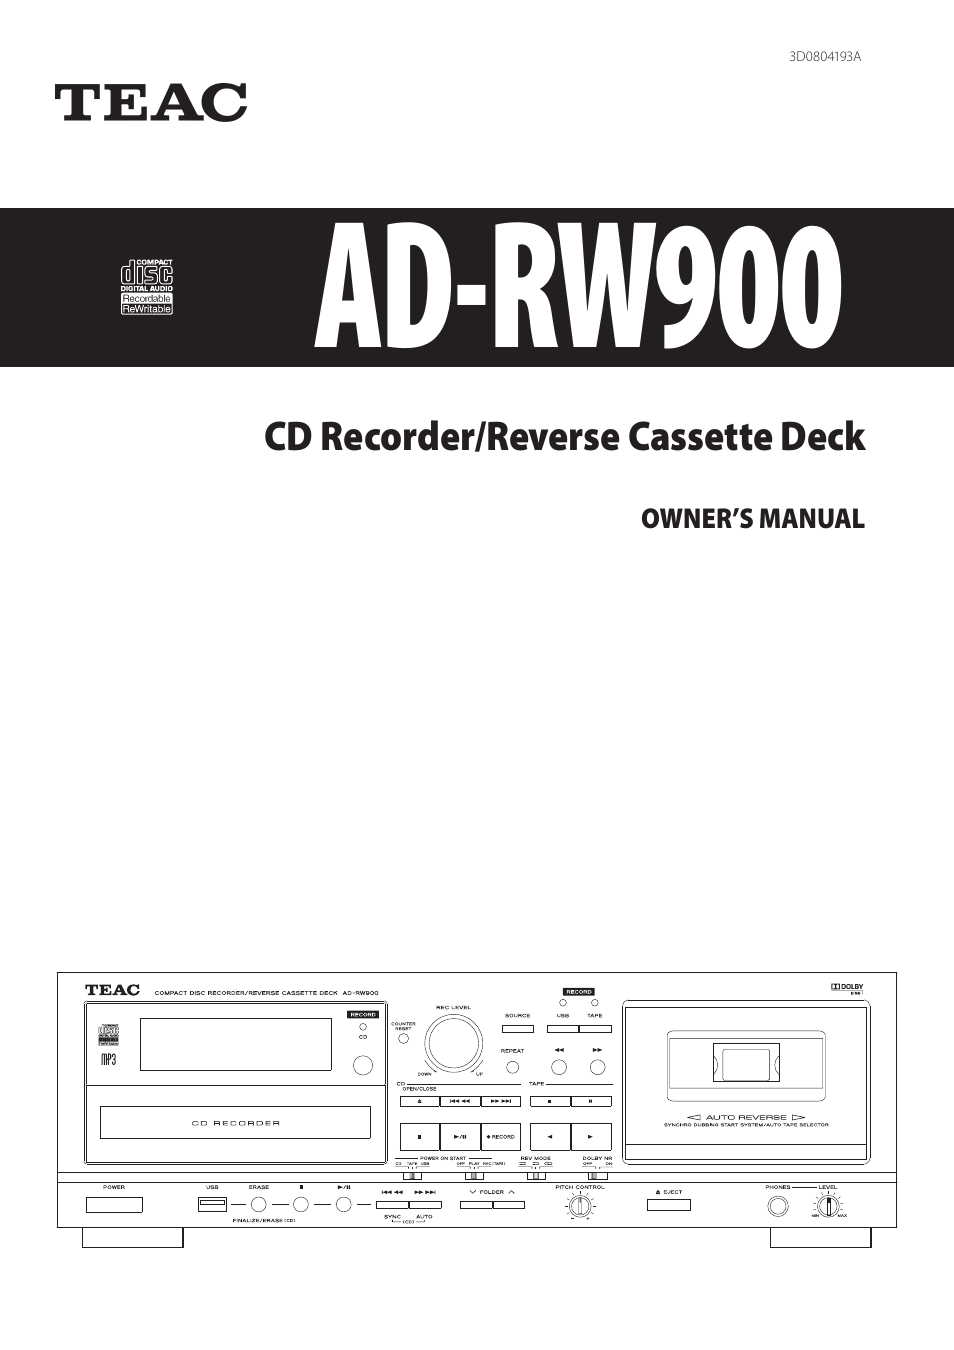 Teac CD Recorder/Reverse Cassette Deck AD-RW900 User Manual | 52 pages